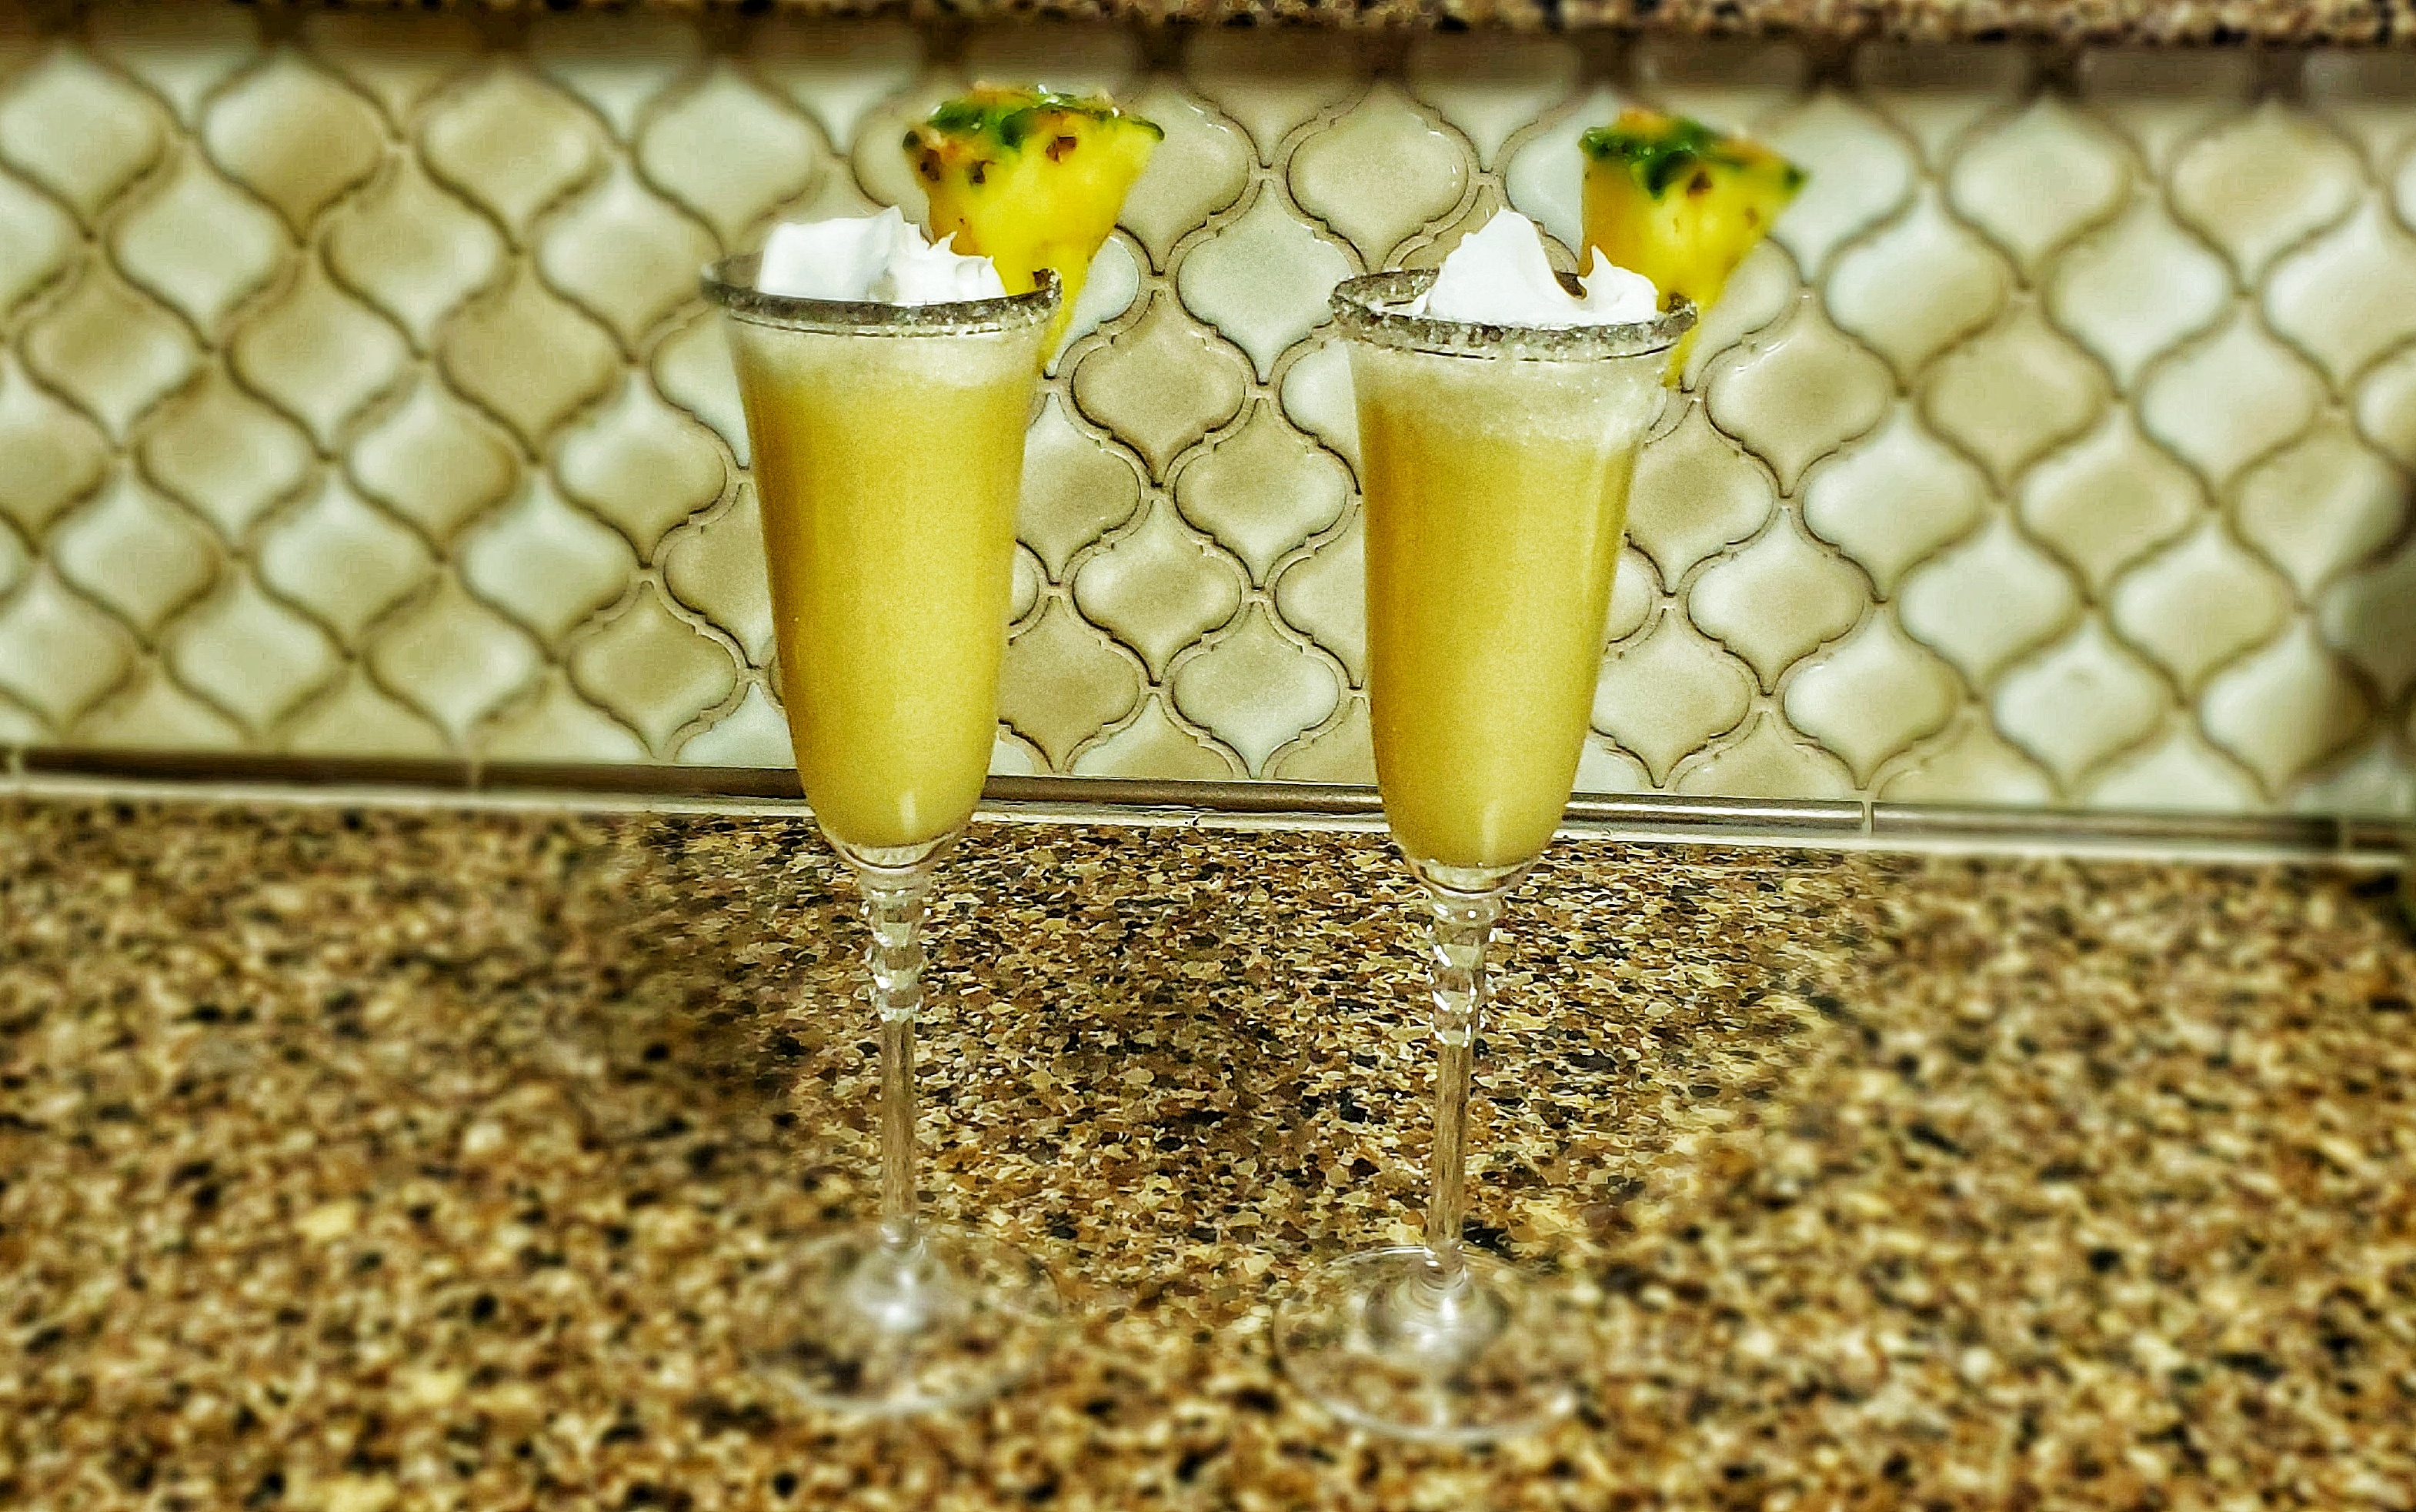 Dole Whip Mimosas are the Perfect Brunch Beverage